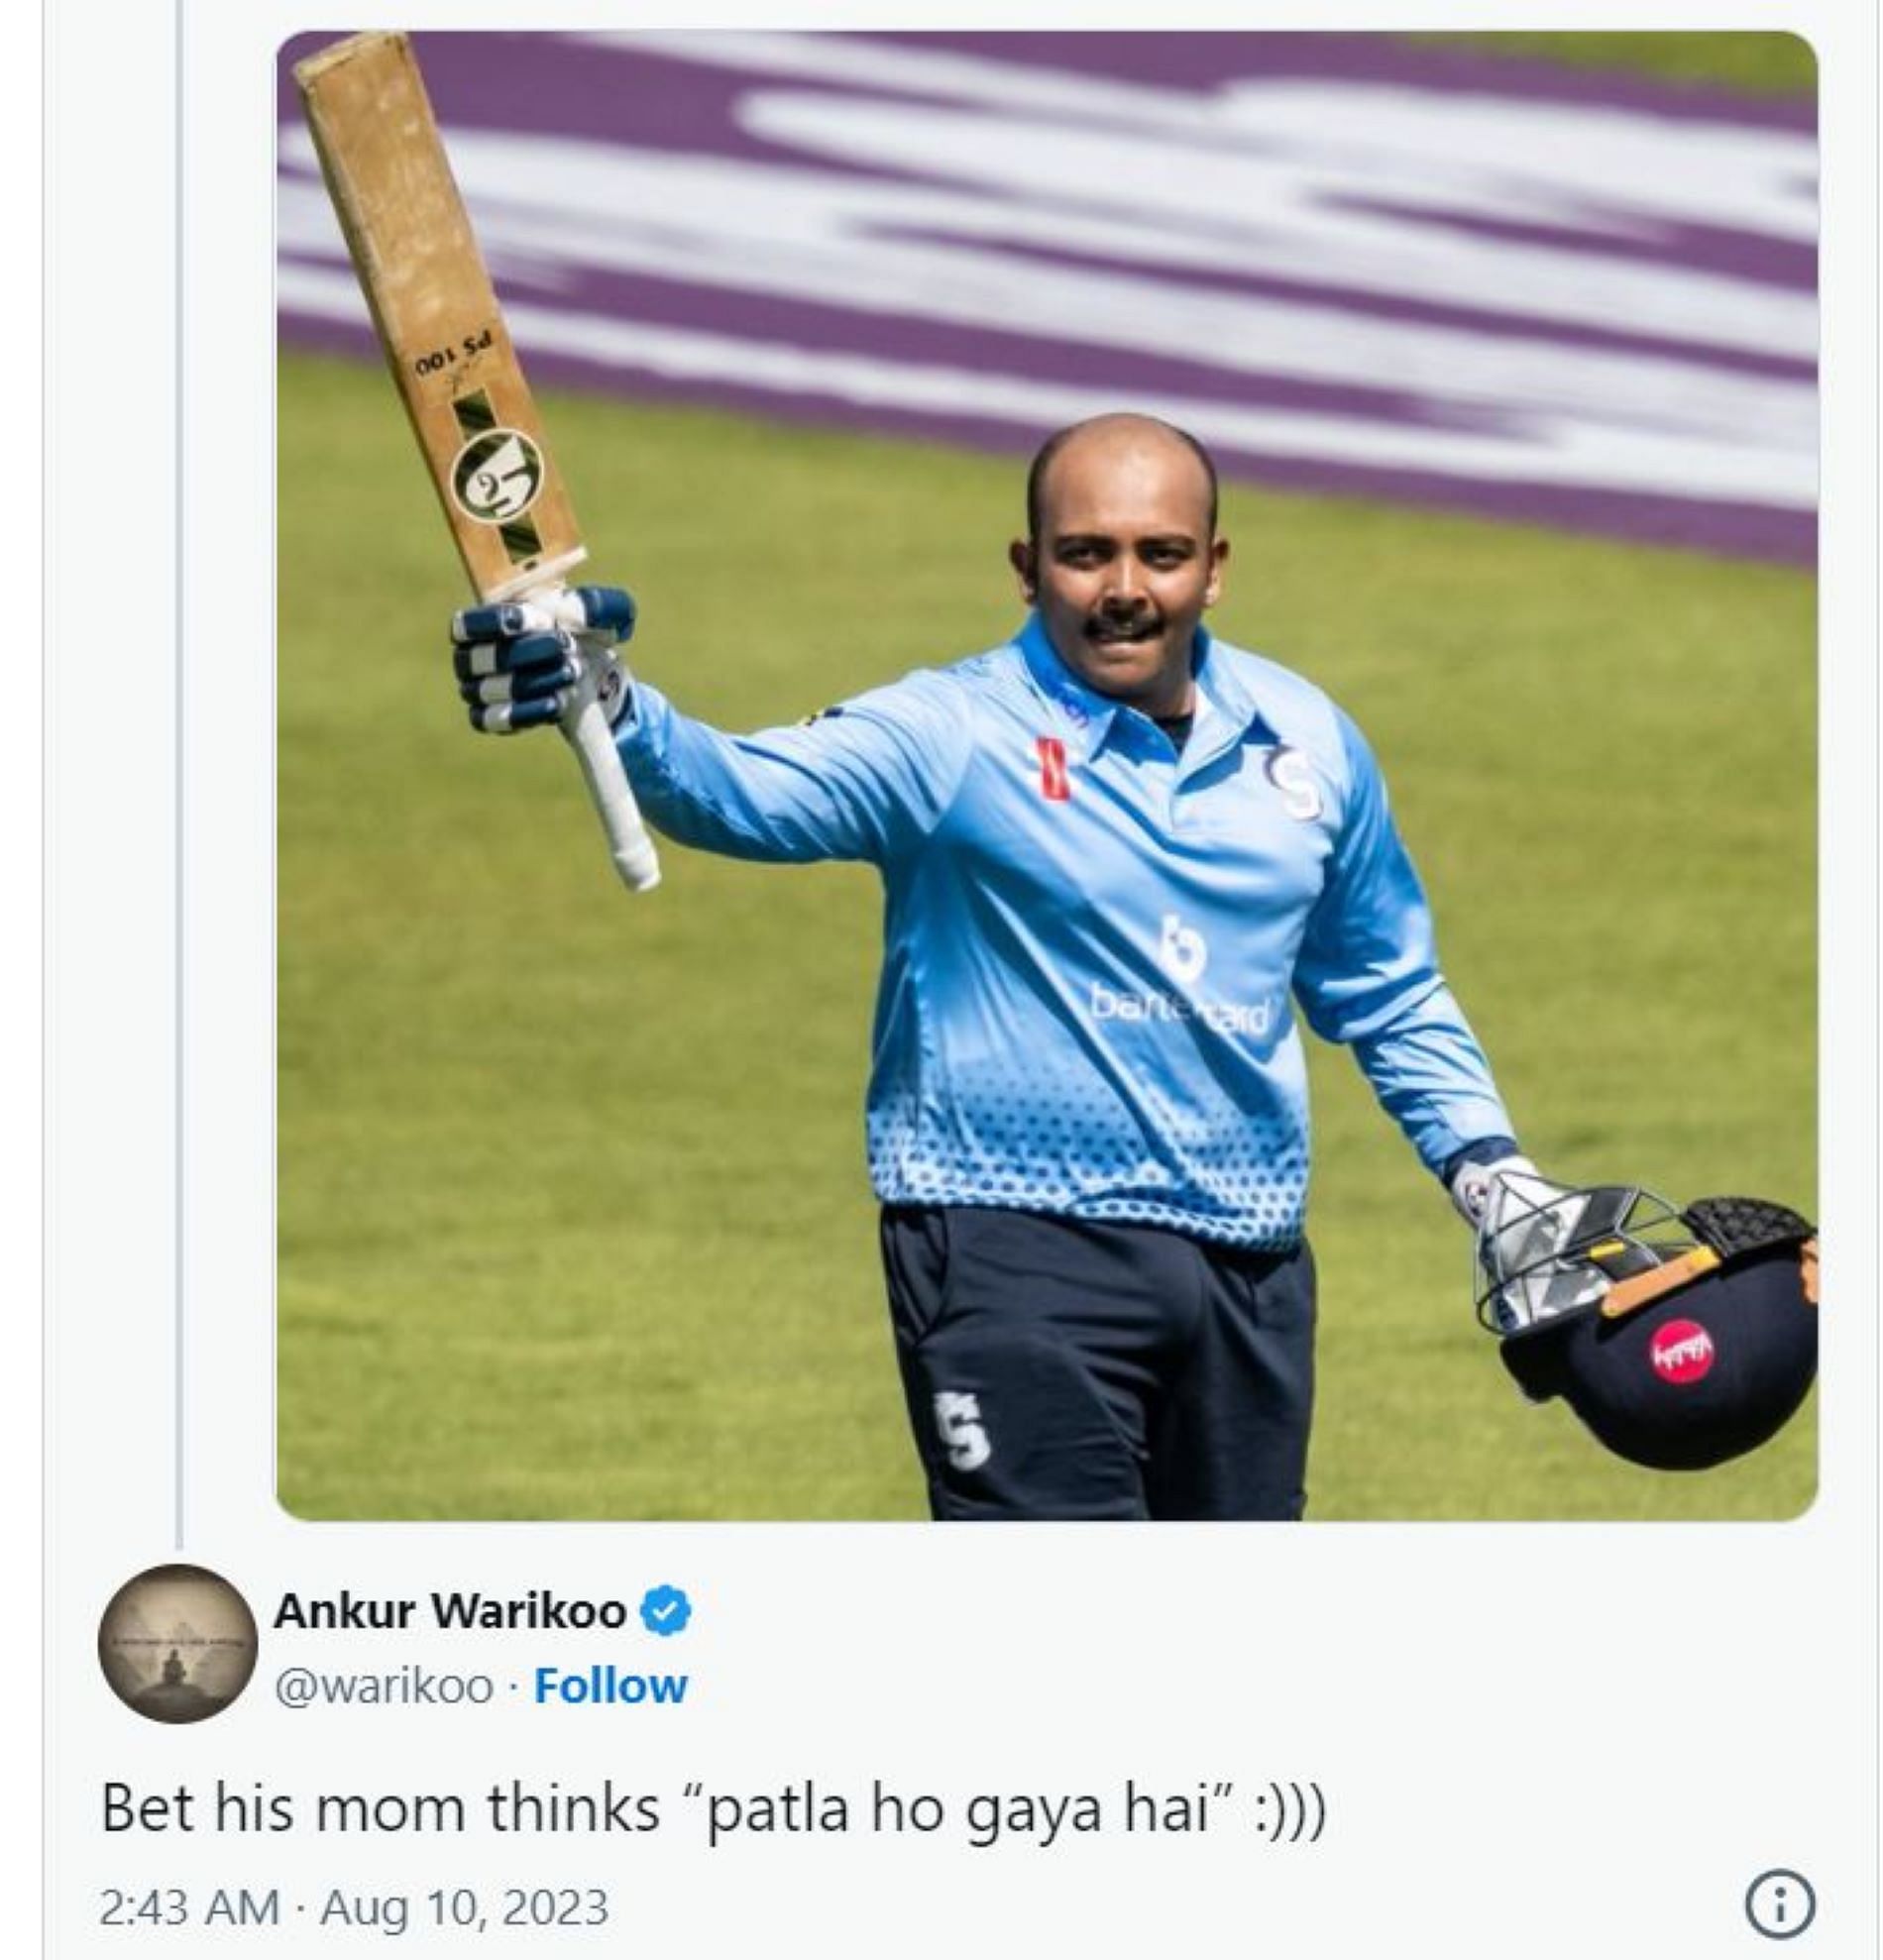 Ankur Warikoo responds with this troll of Prithvi Shaw.